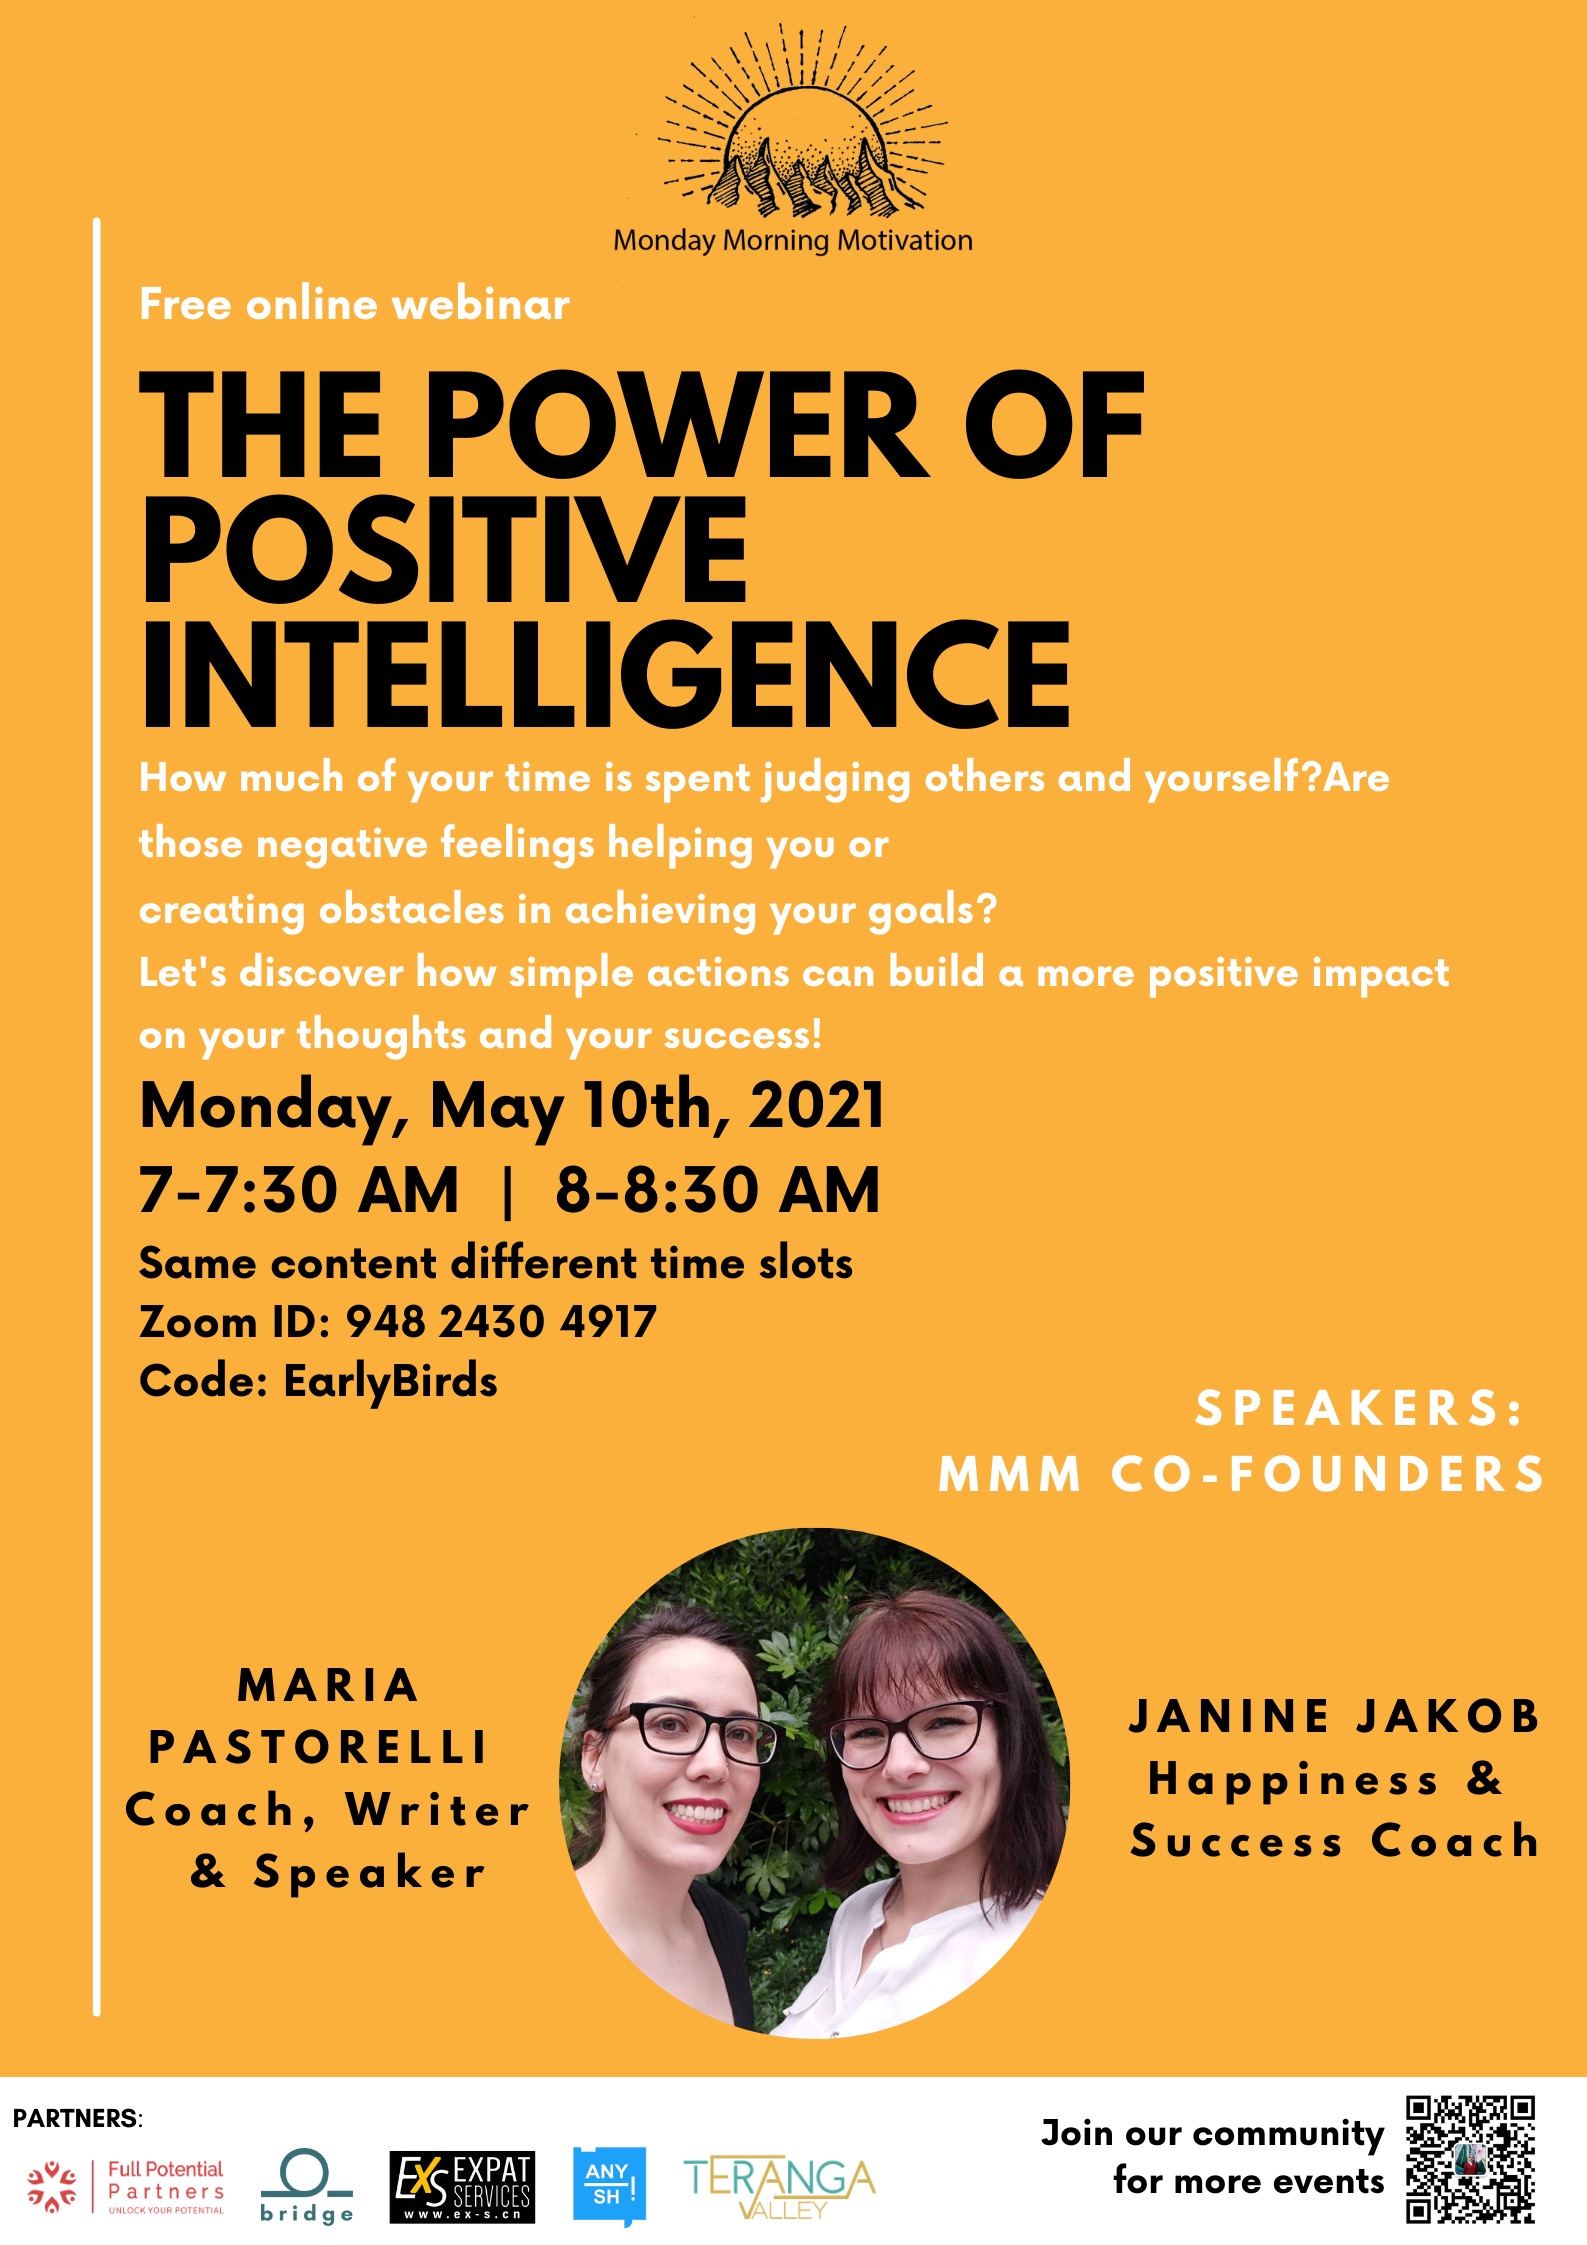 The power of positive intelligence | Shanghai Events